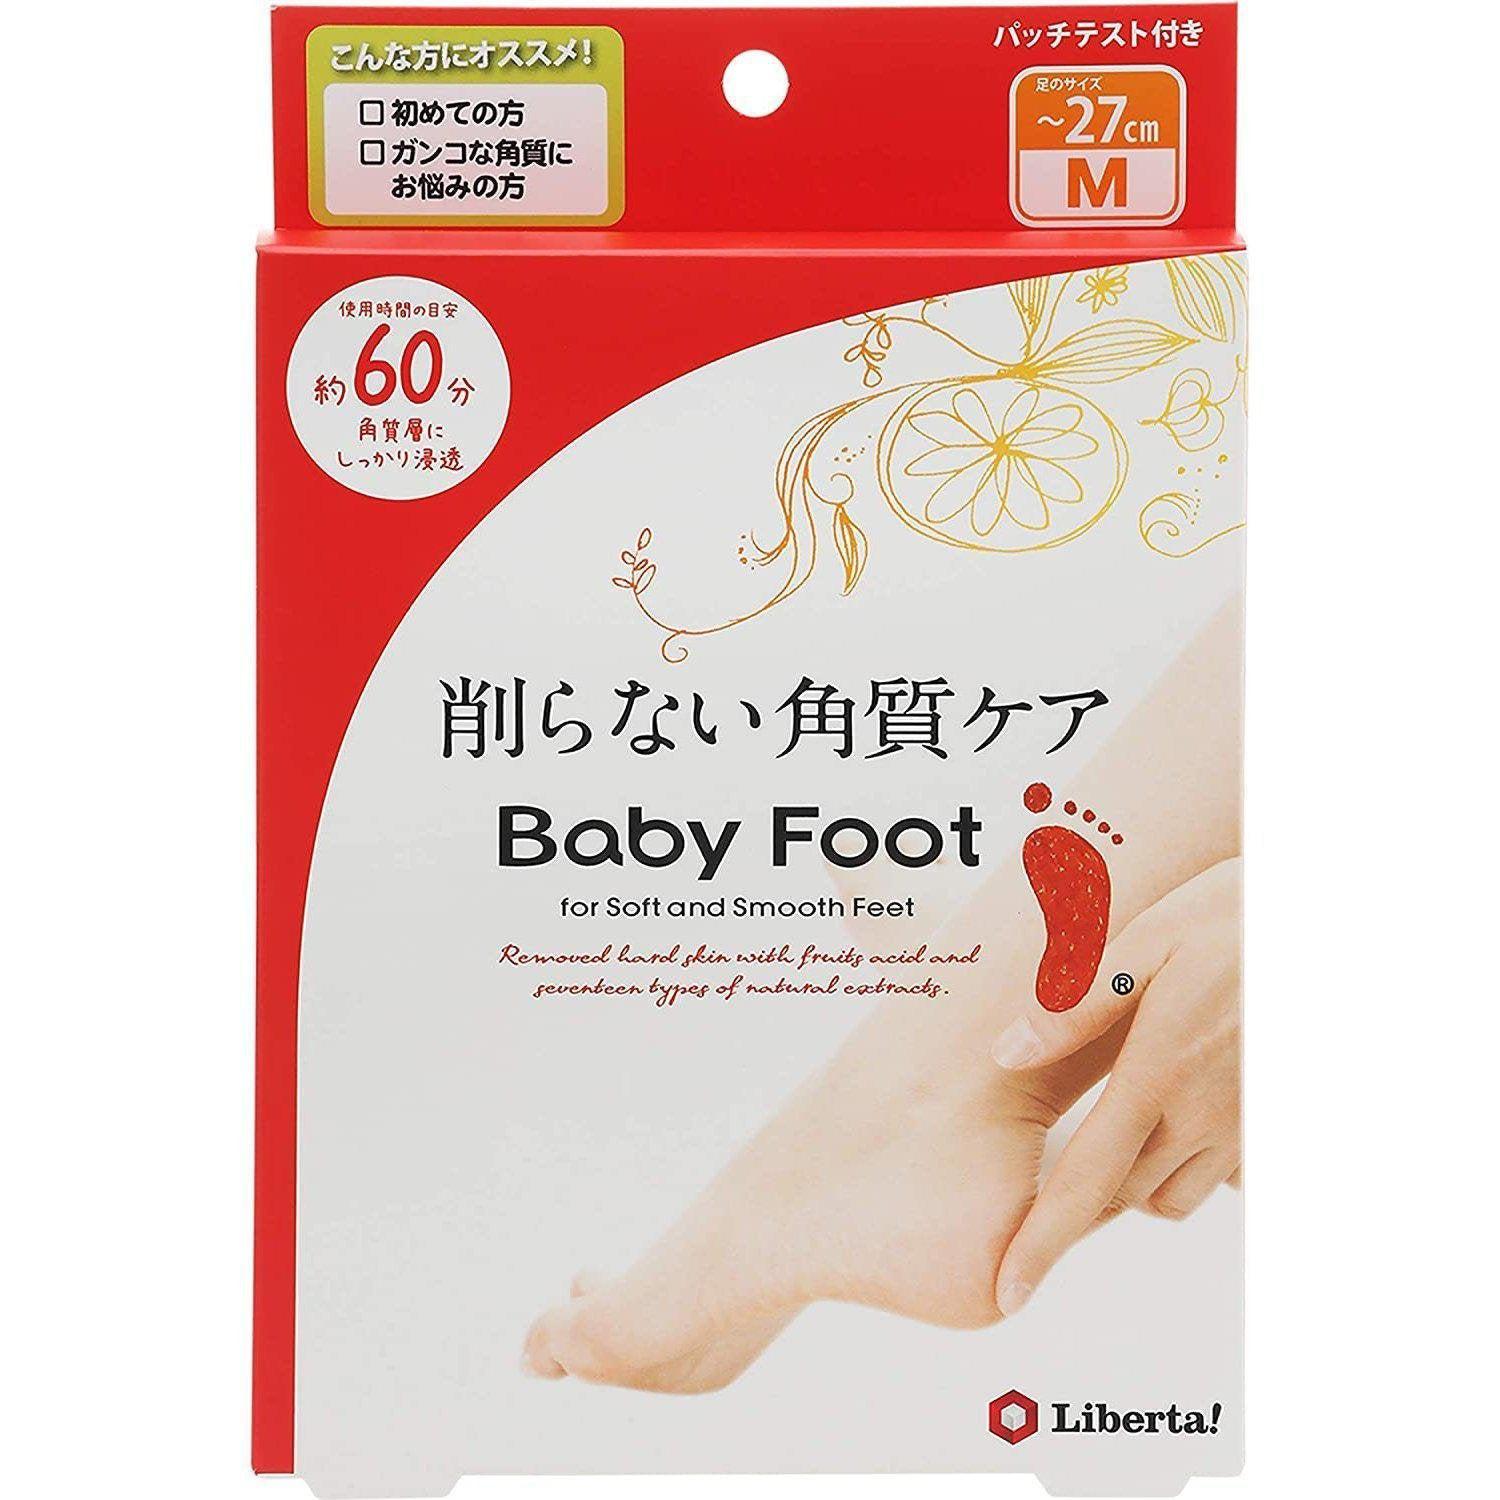 Baby Foot © Original Exfoliation Foot Peel (16 Natural Extracts)